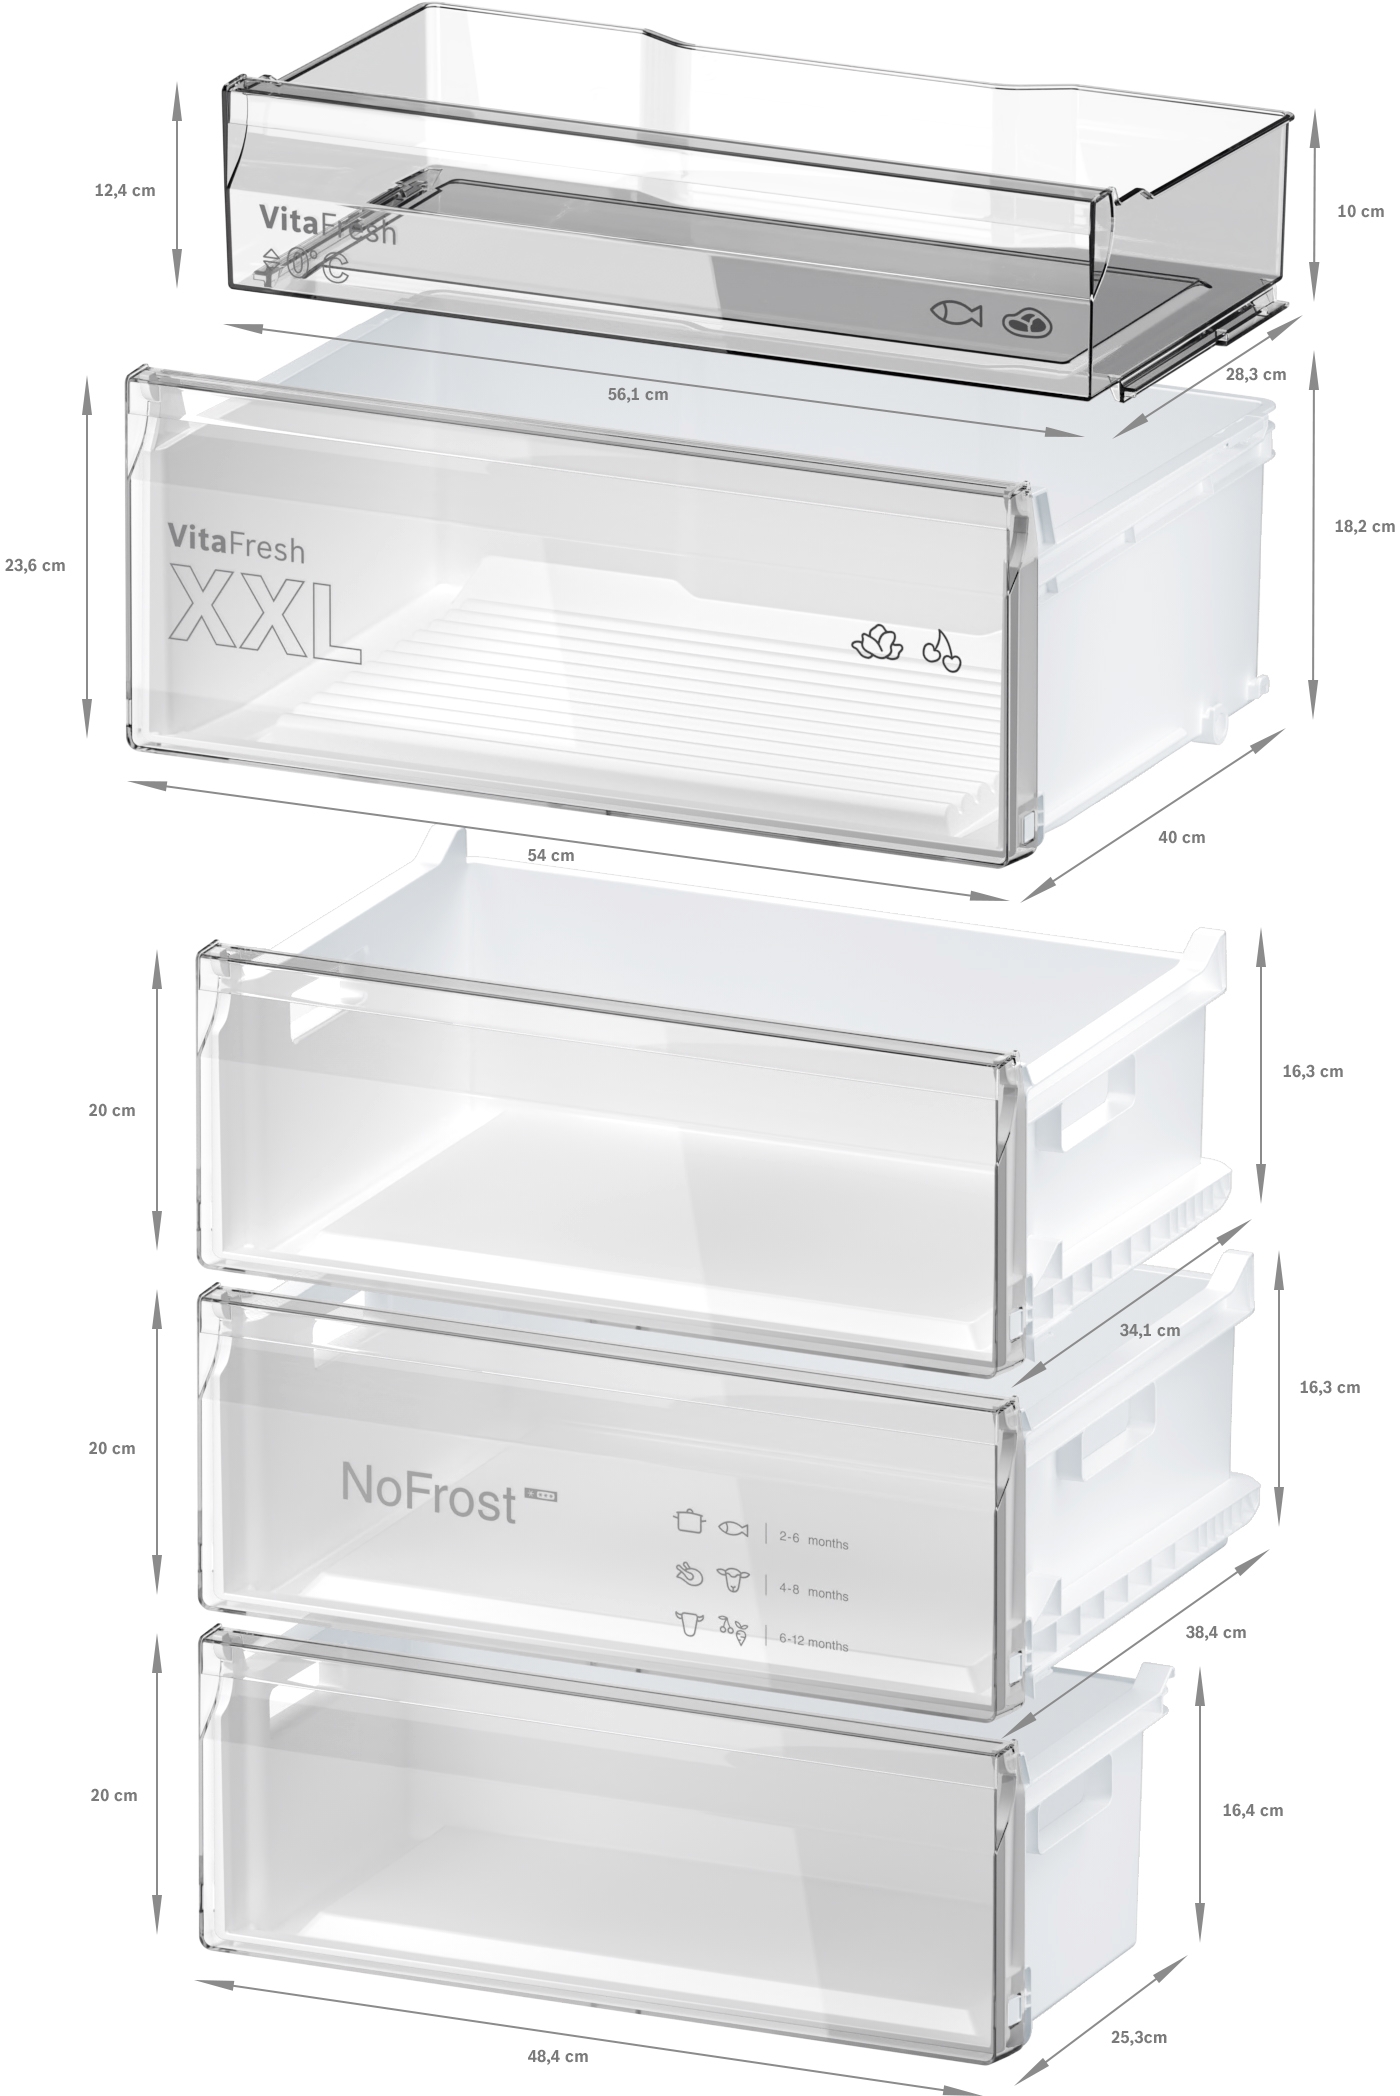 Series 4, free-standing fridge-freezer with freezer at bottom, 203 x 70 cm, Stainless steel (with anti-fingerprint), KGN49VICT